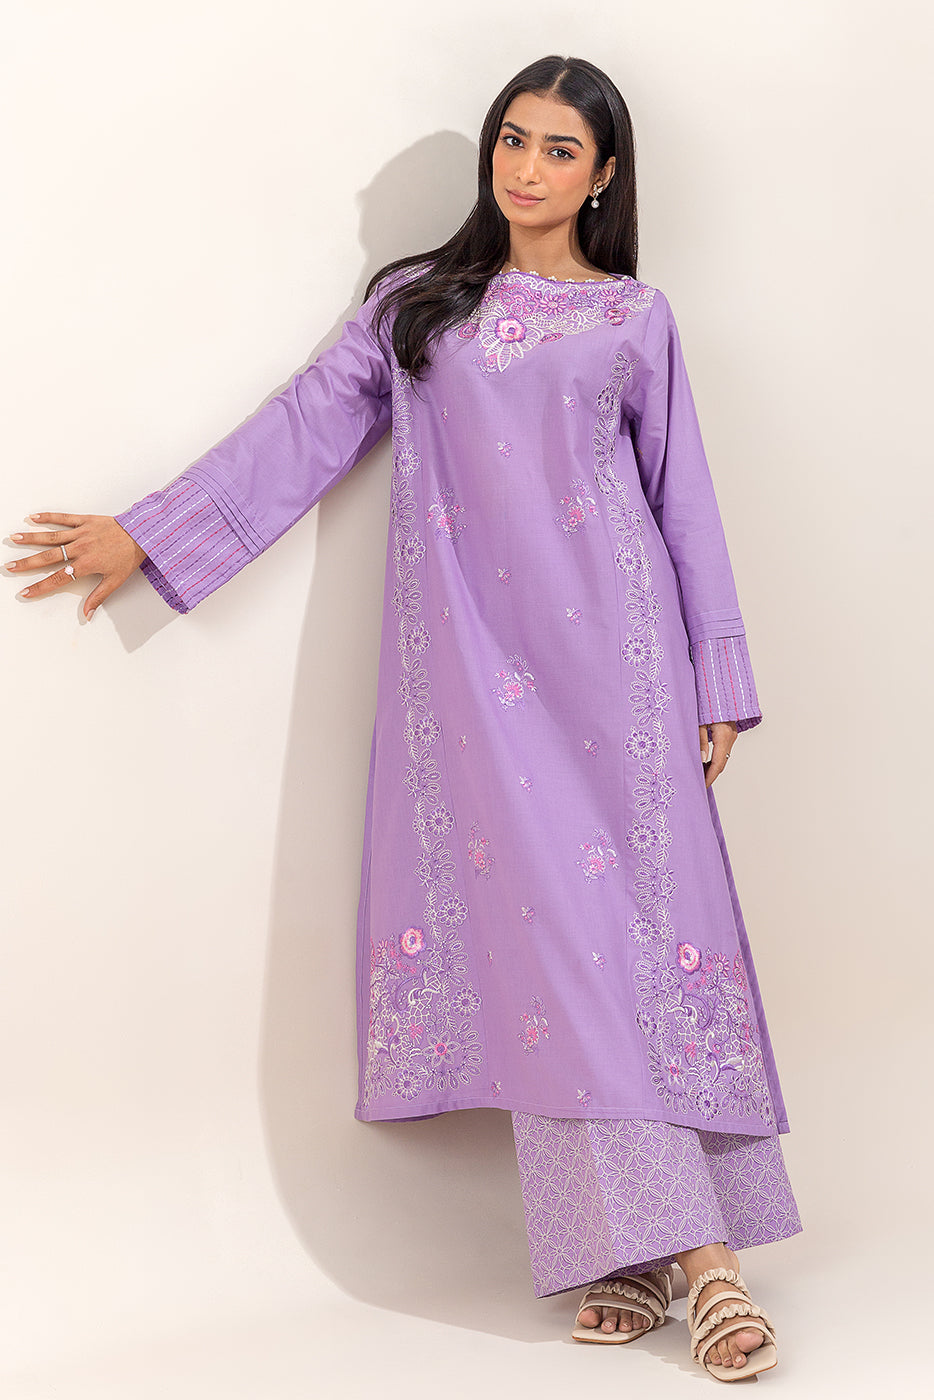 2 PIECE EMBROIDERED LAWN SUIT-ORCHID PETAL (UNSTITCHED) - BEECHTREE